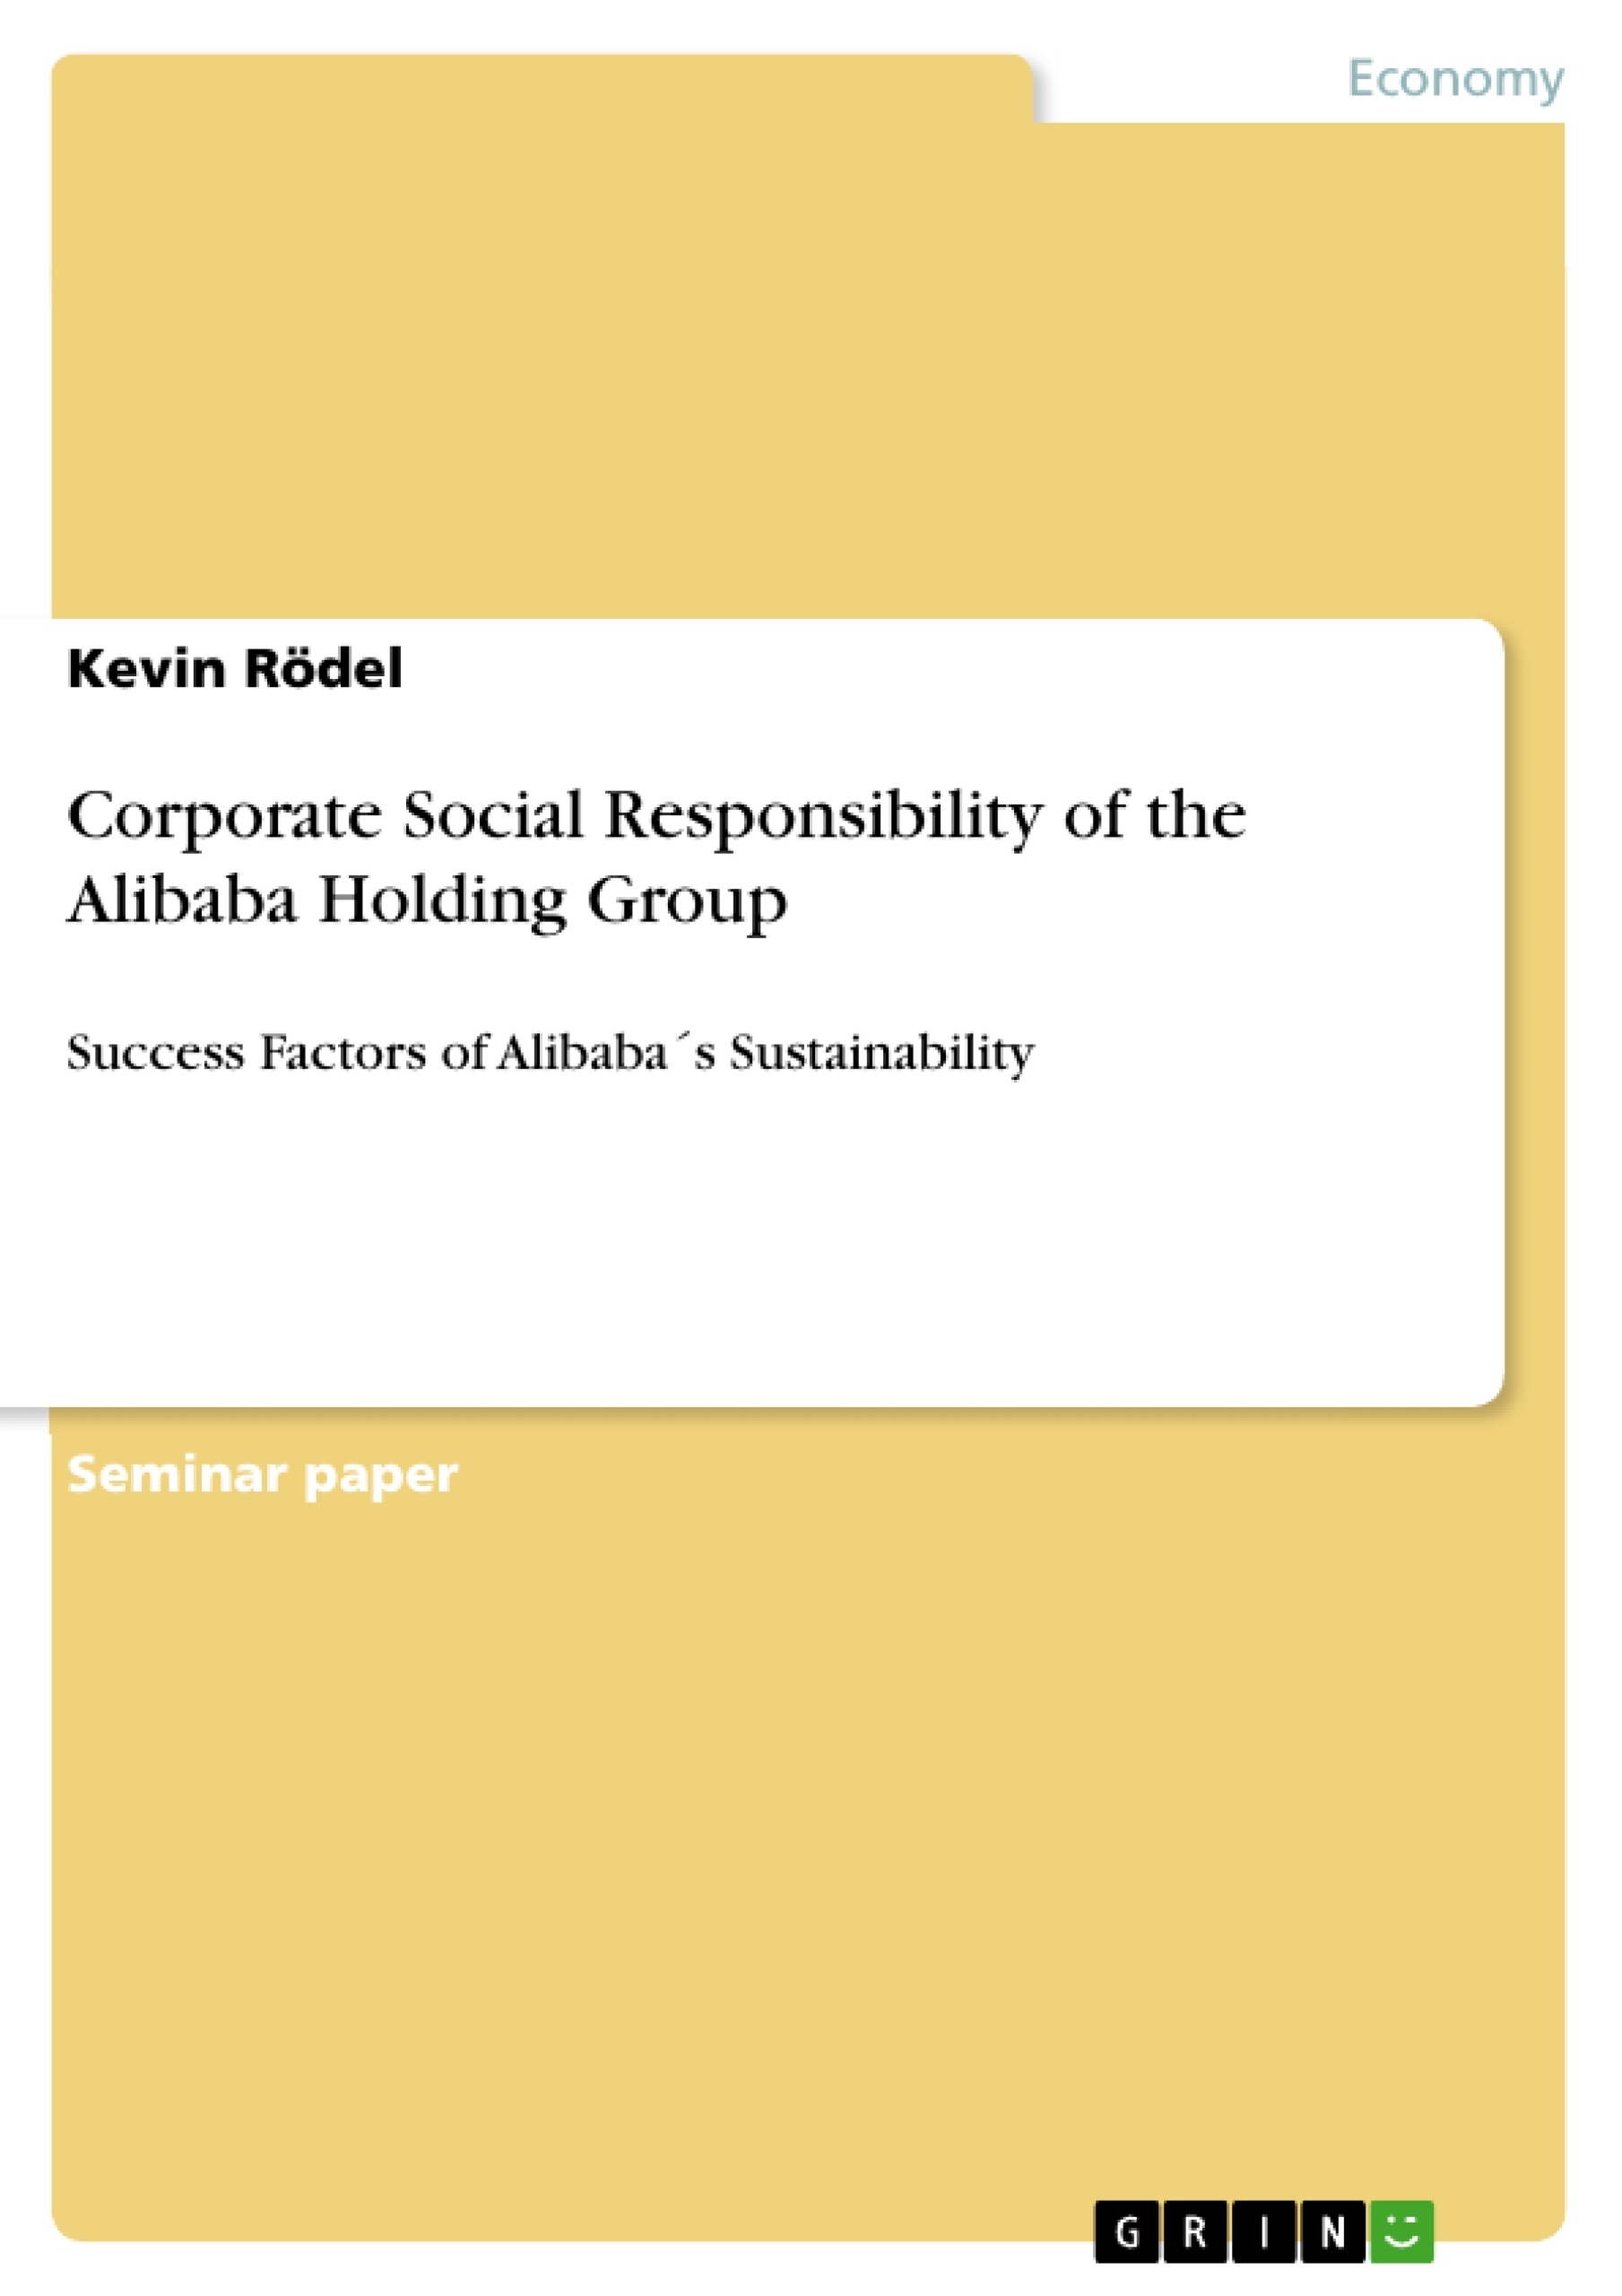 Title: Corporate Social Responsibility of the Alibaba Holding Group